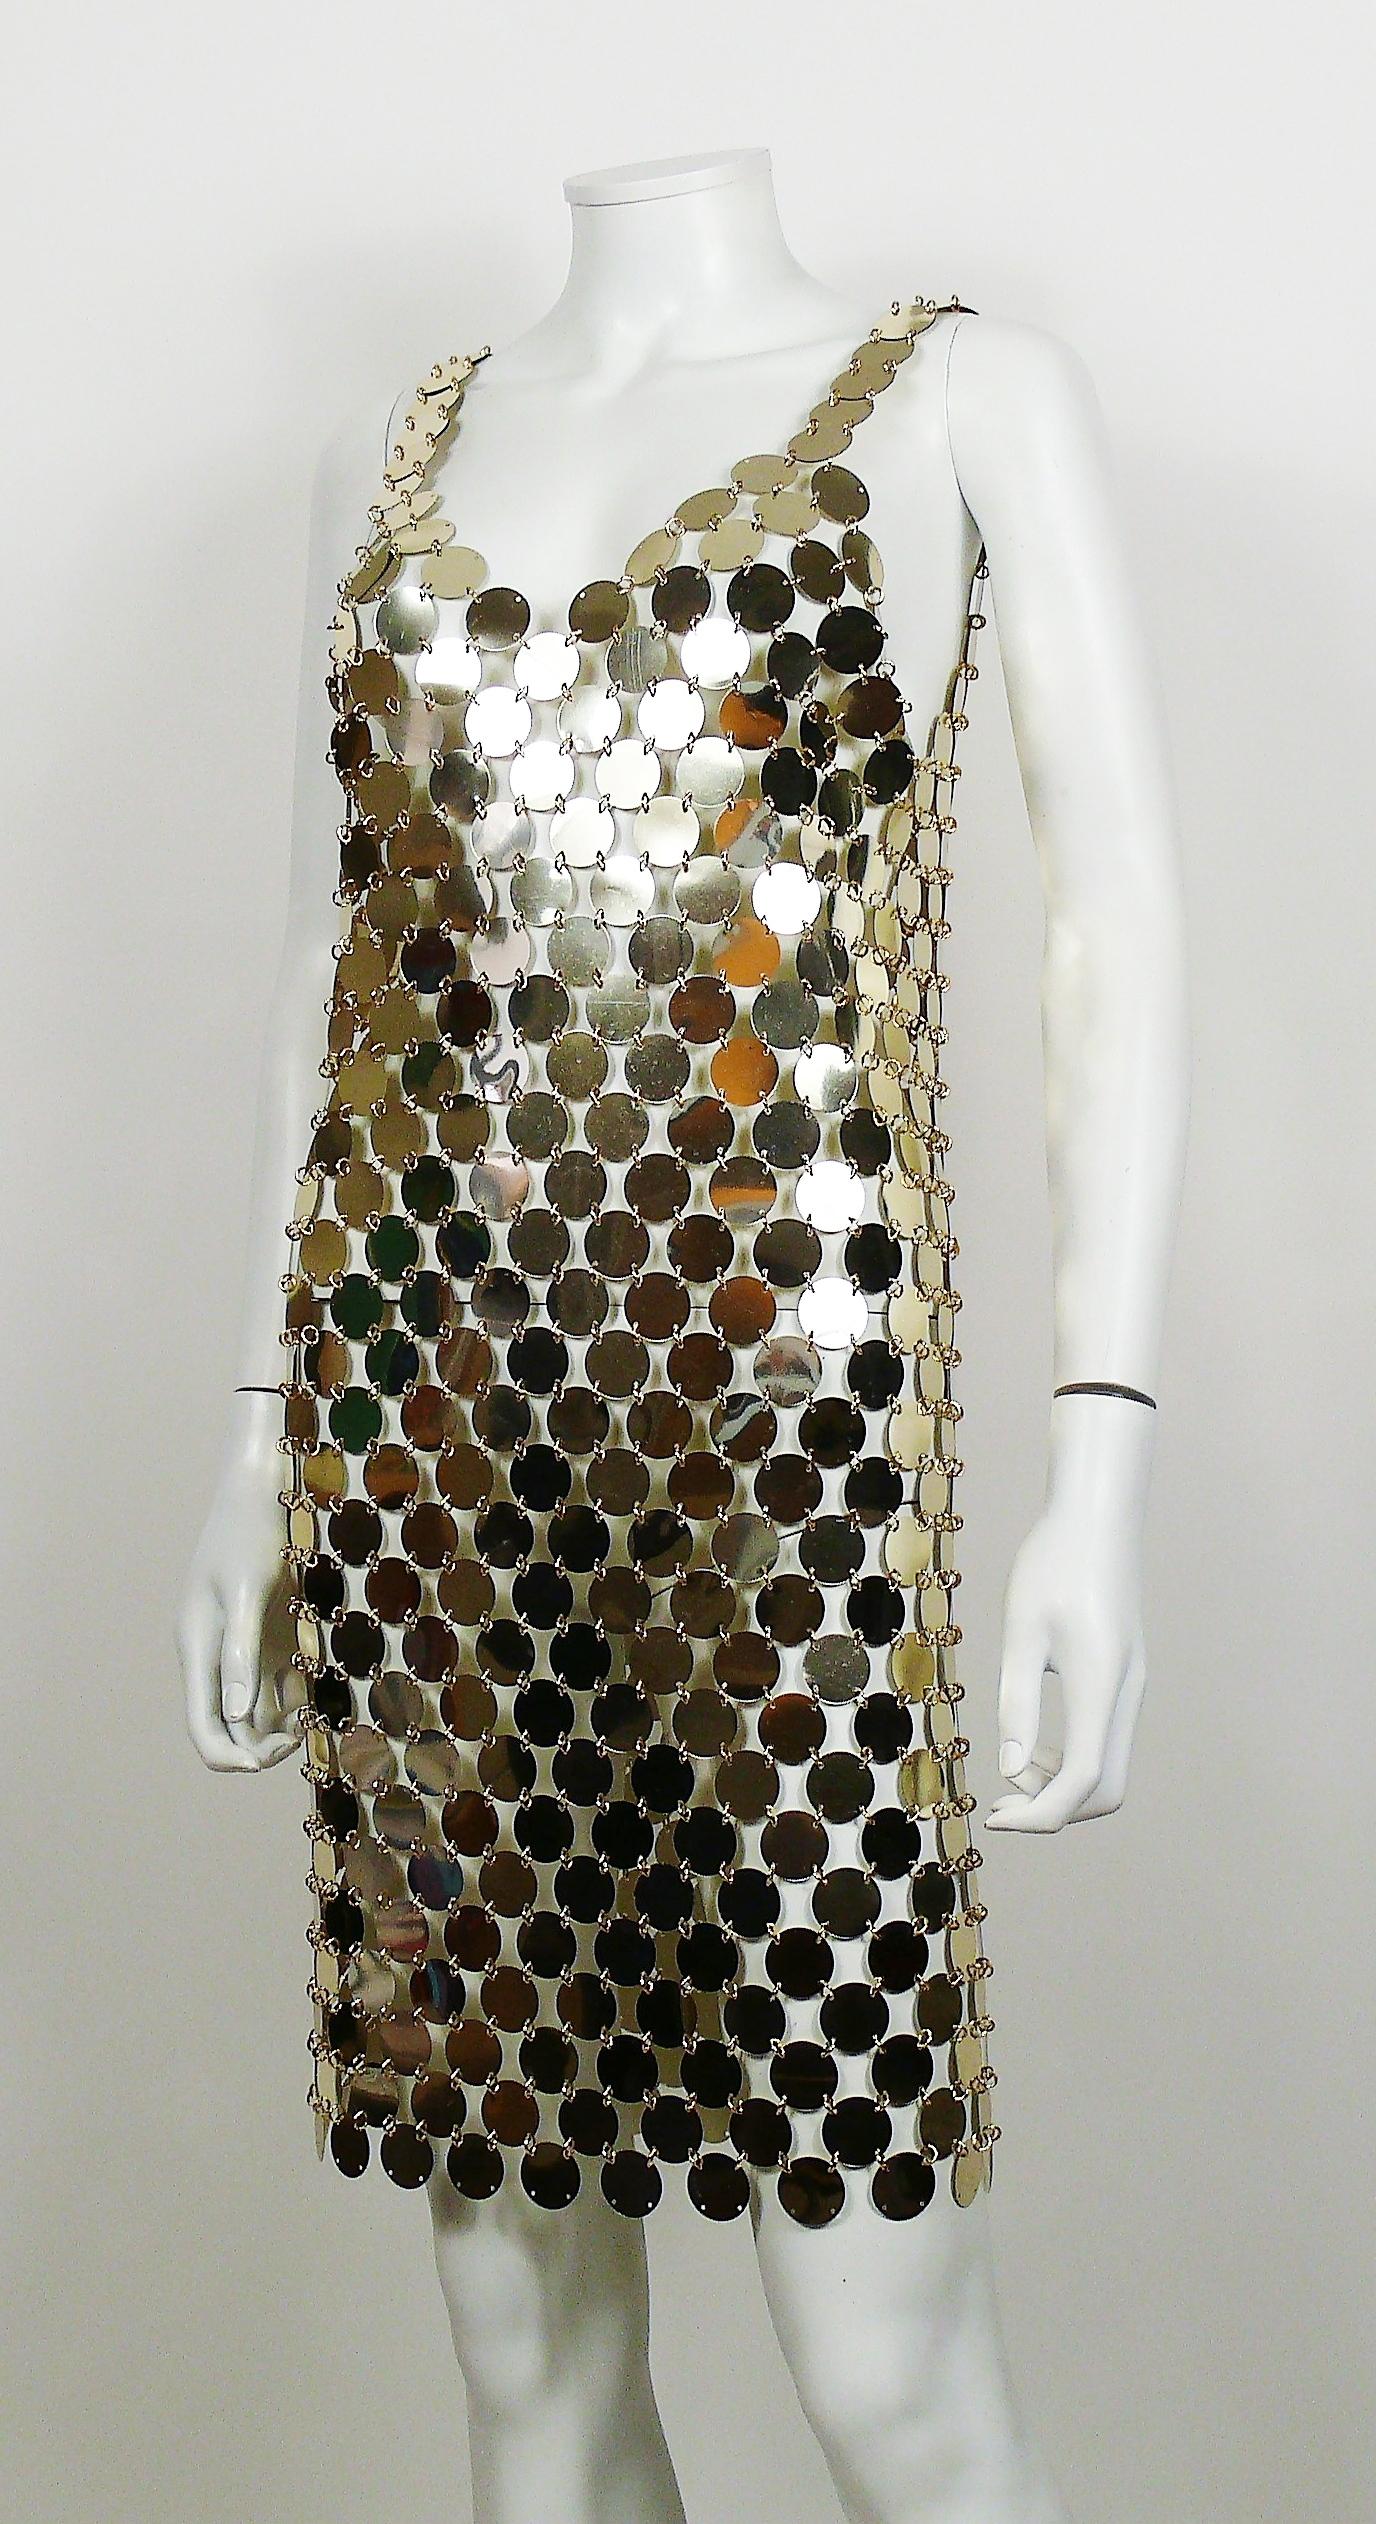 Paco Rabanne Vintage 1996 Gold Rhodoid Disc Do It Yourself Dress 2